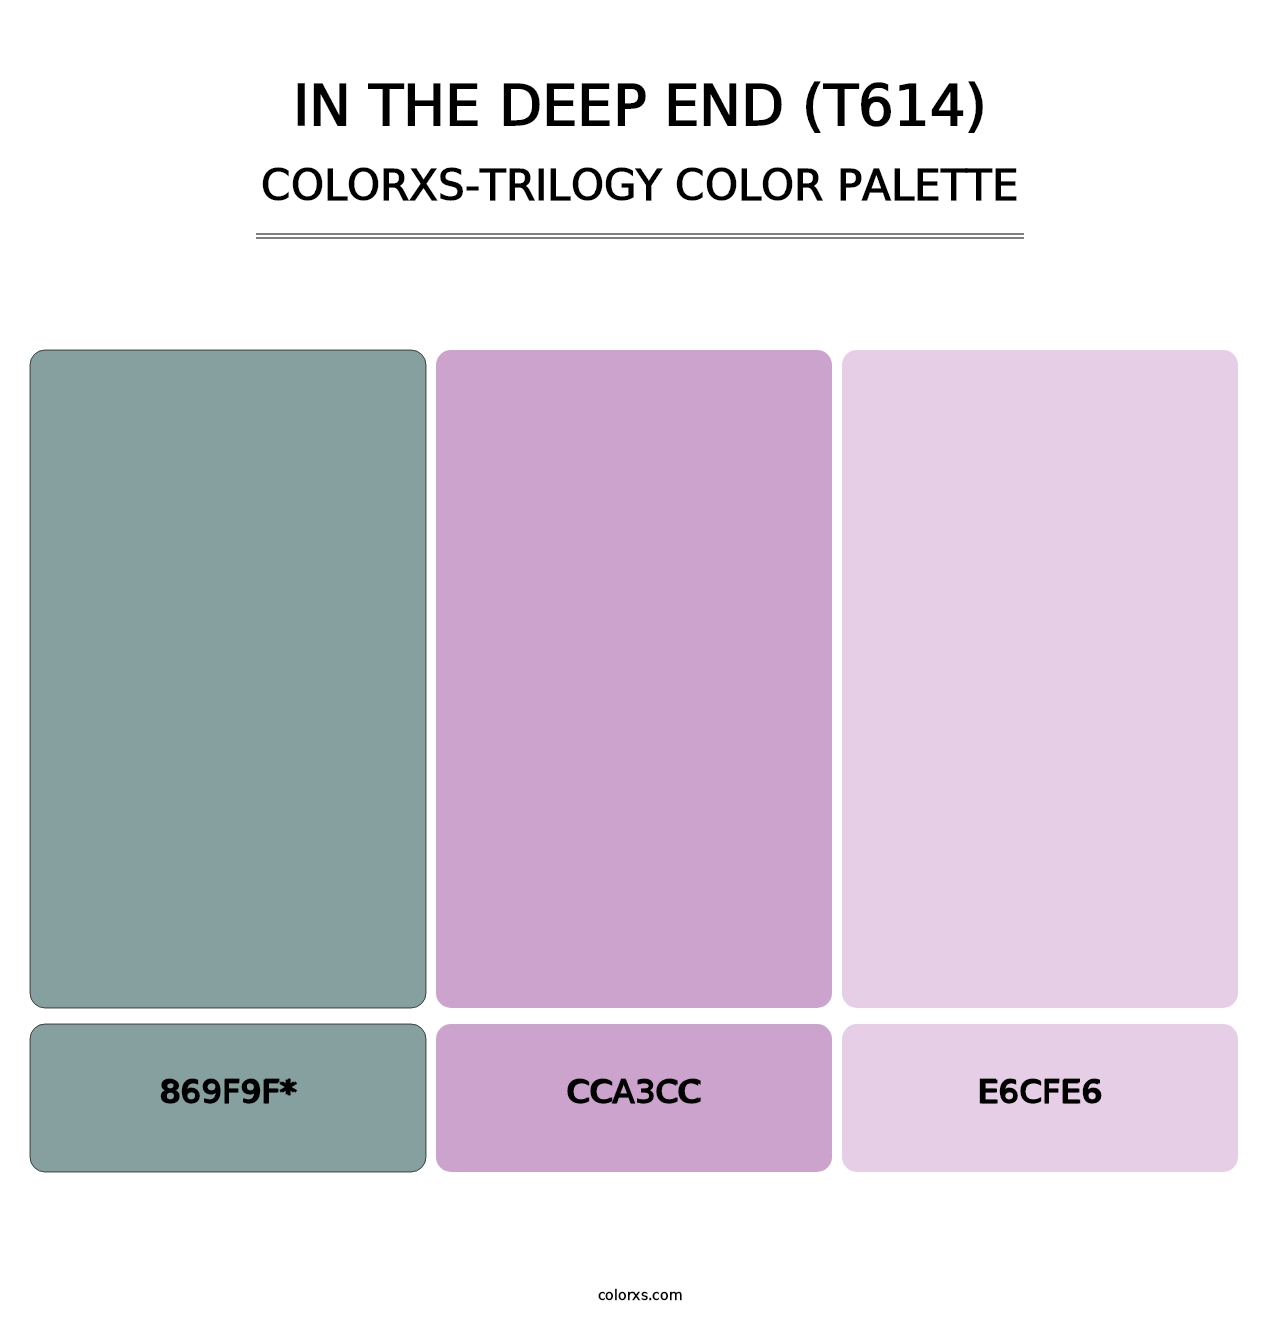 In the Deep End (T614) - Colorxs Trilogy Palette